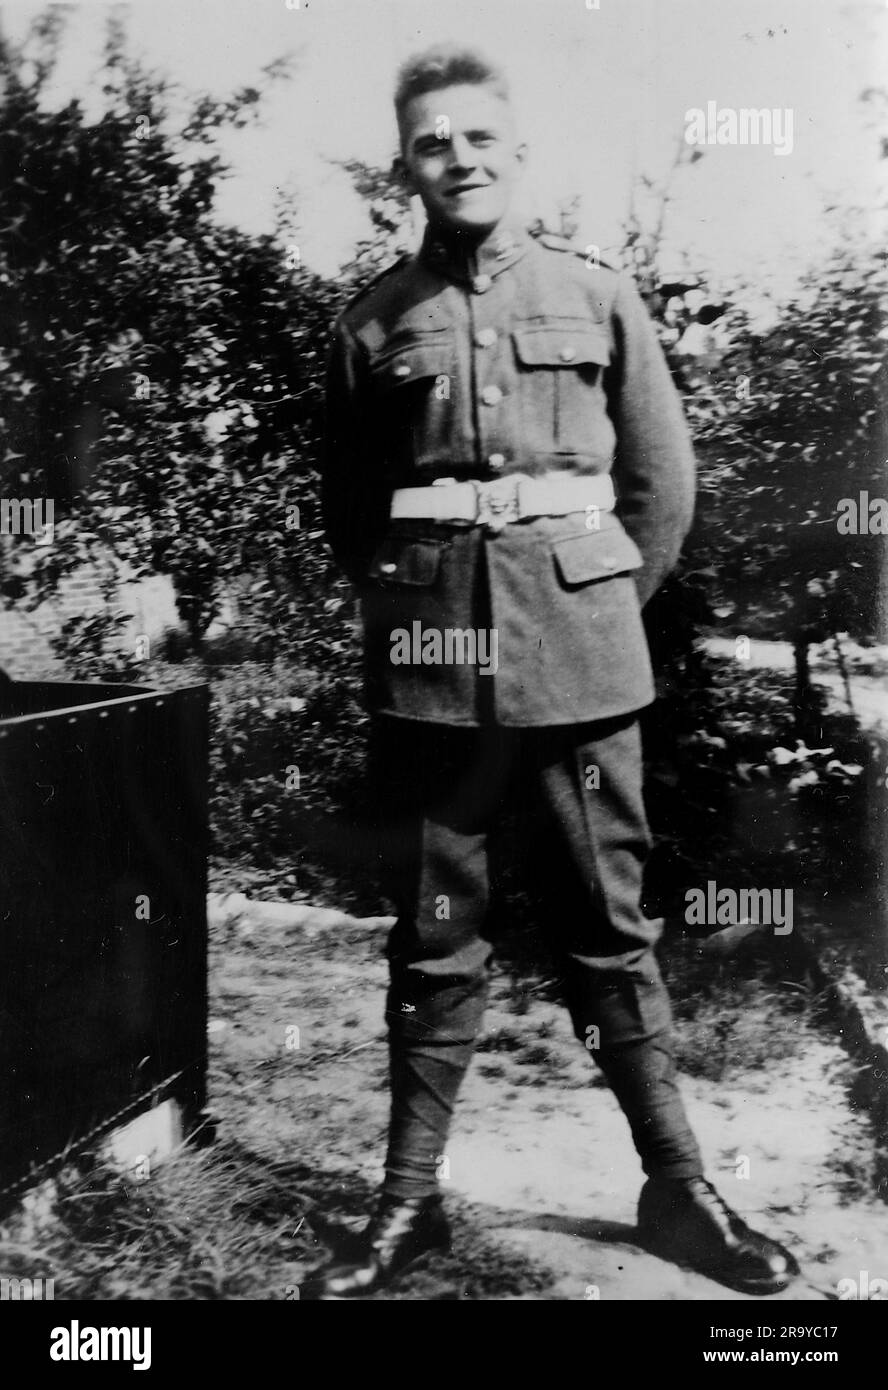 A soldier in uniform in an English garden. Photo from a family album of images mainly taken in the UK, around 1929. The family lived in Witley, Surrey, and had some links to the military. Stock Photo